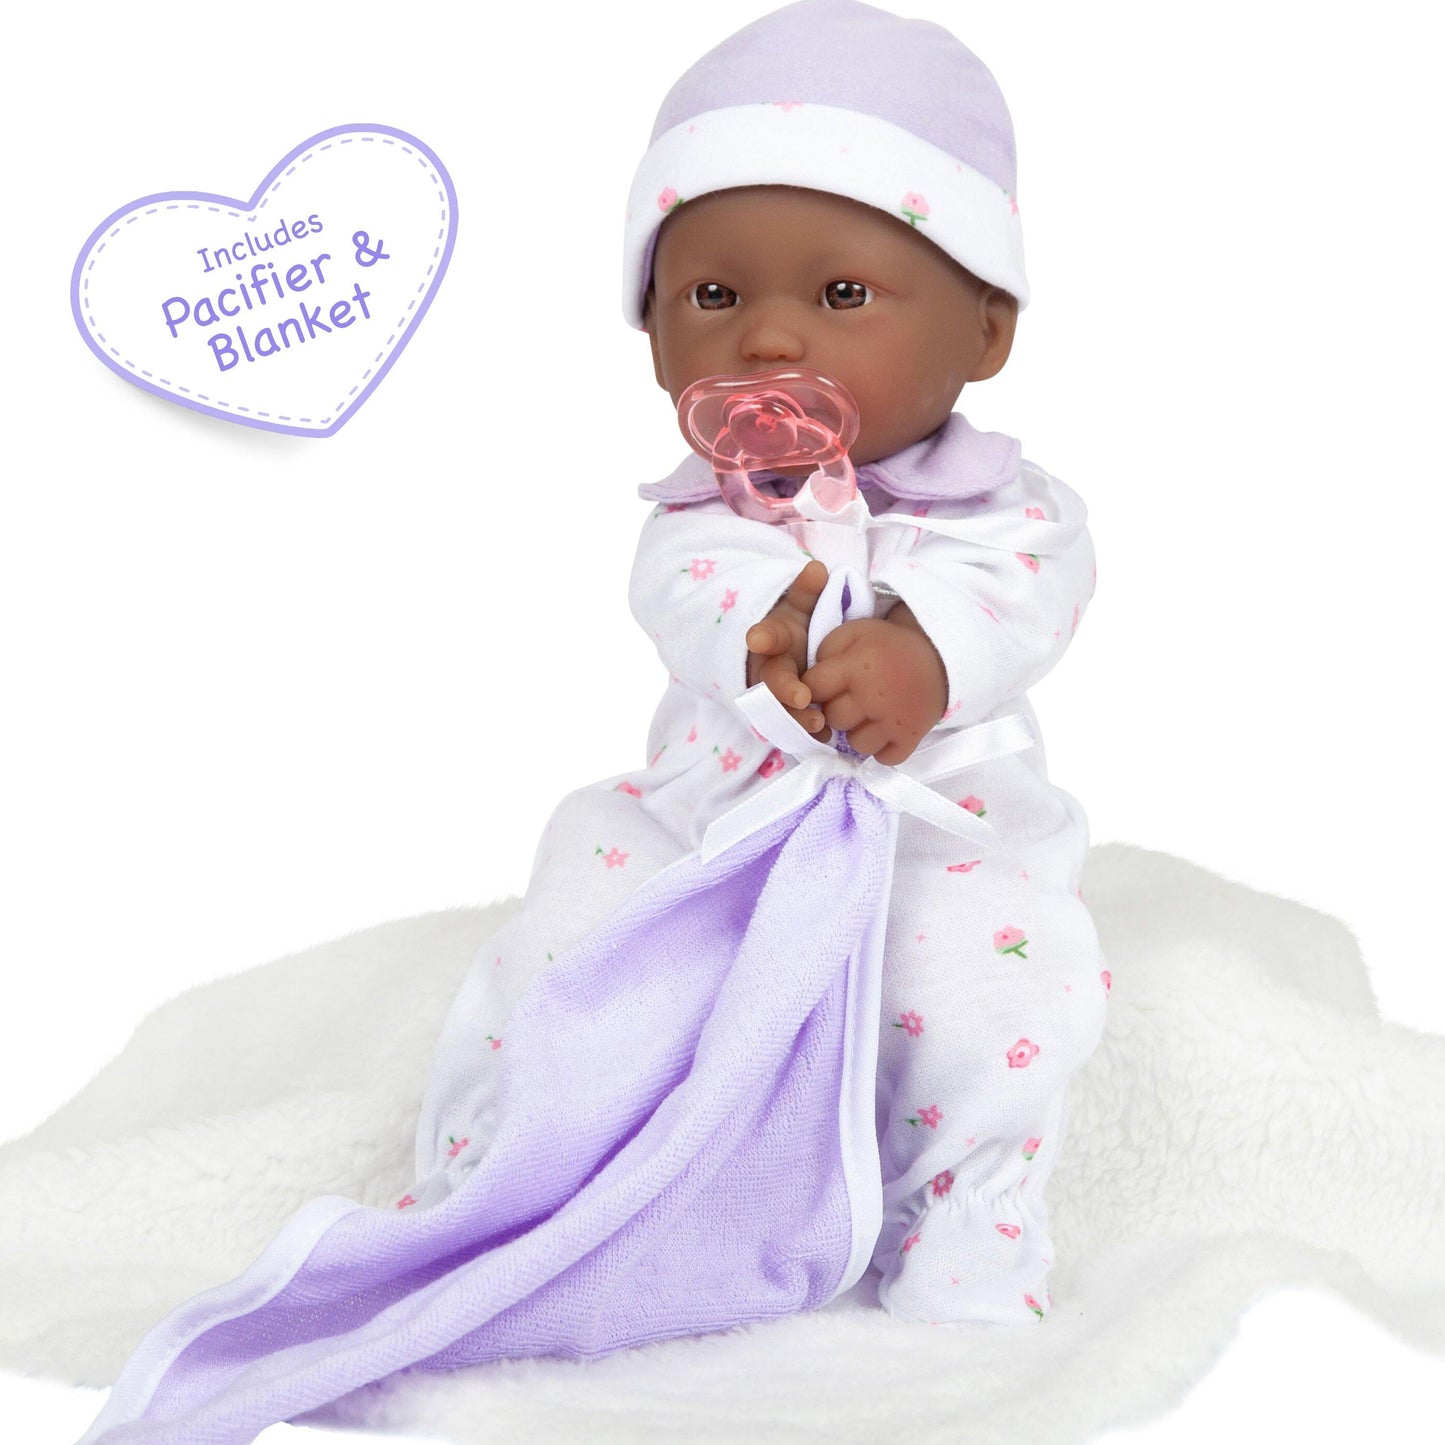 JC Toys, La Baby 11 inch Soft Body African American Baby Doll in Purple Outfit - JC Toys Group Inc.